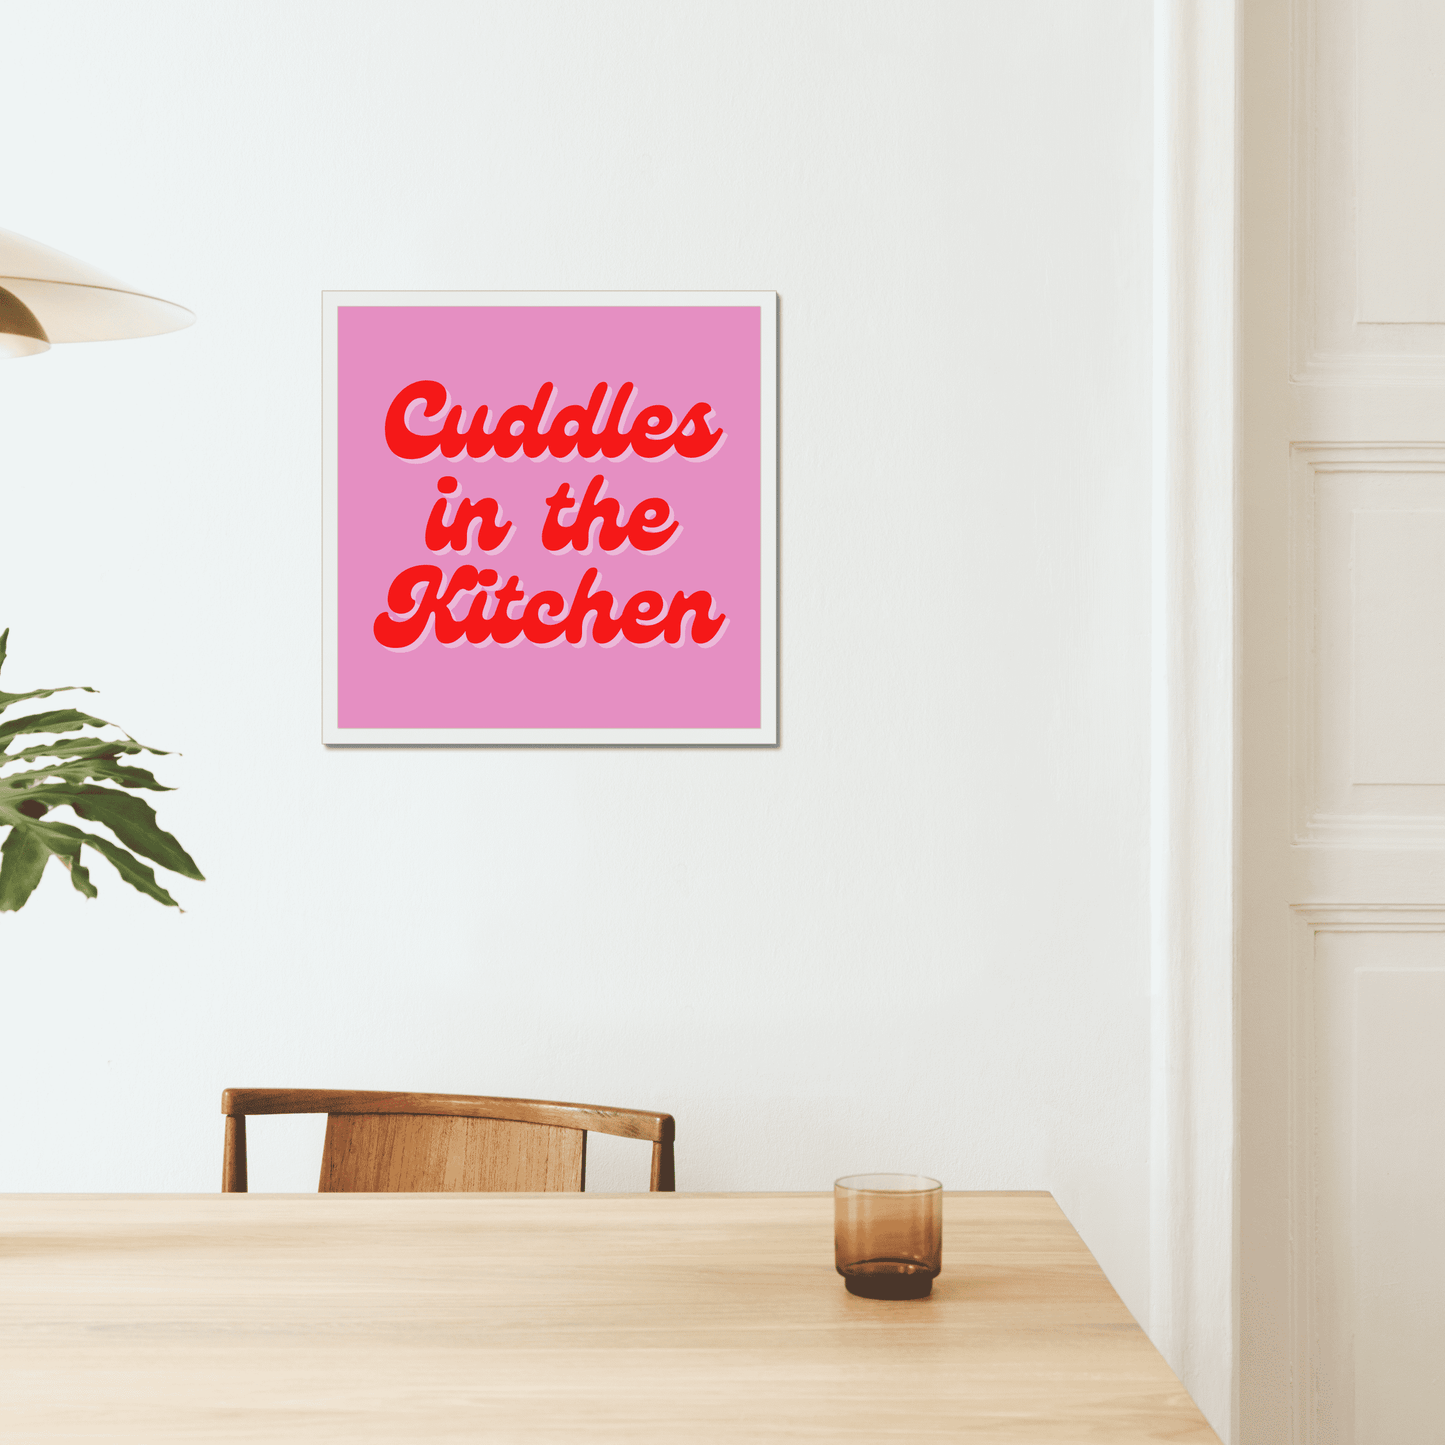 Cuddles in the kitchen art print. A bright and quirky print to make a fun statement in your home. A pink background with a red retro font. We love this Arctic Monkeys, Mardy Bum inspired print.